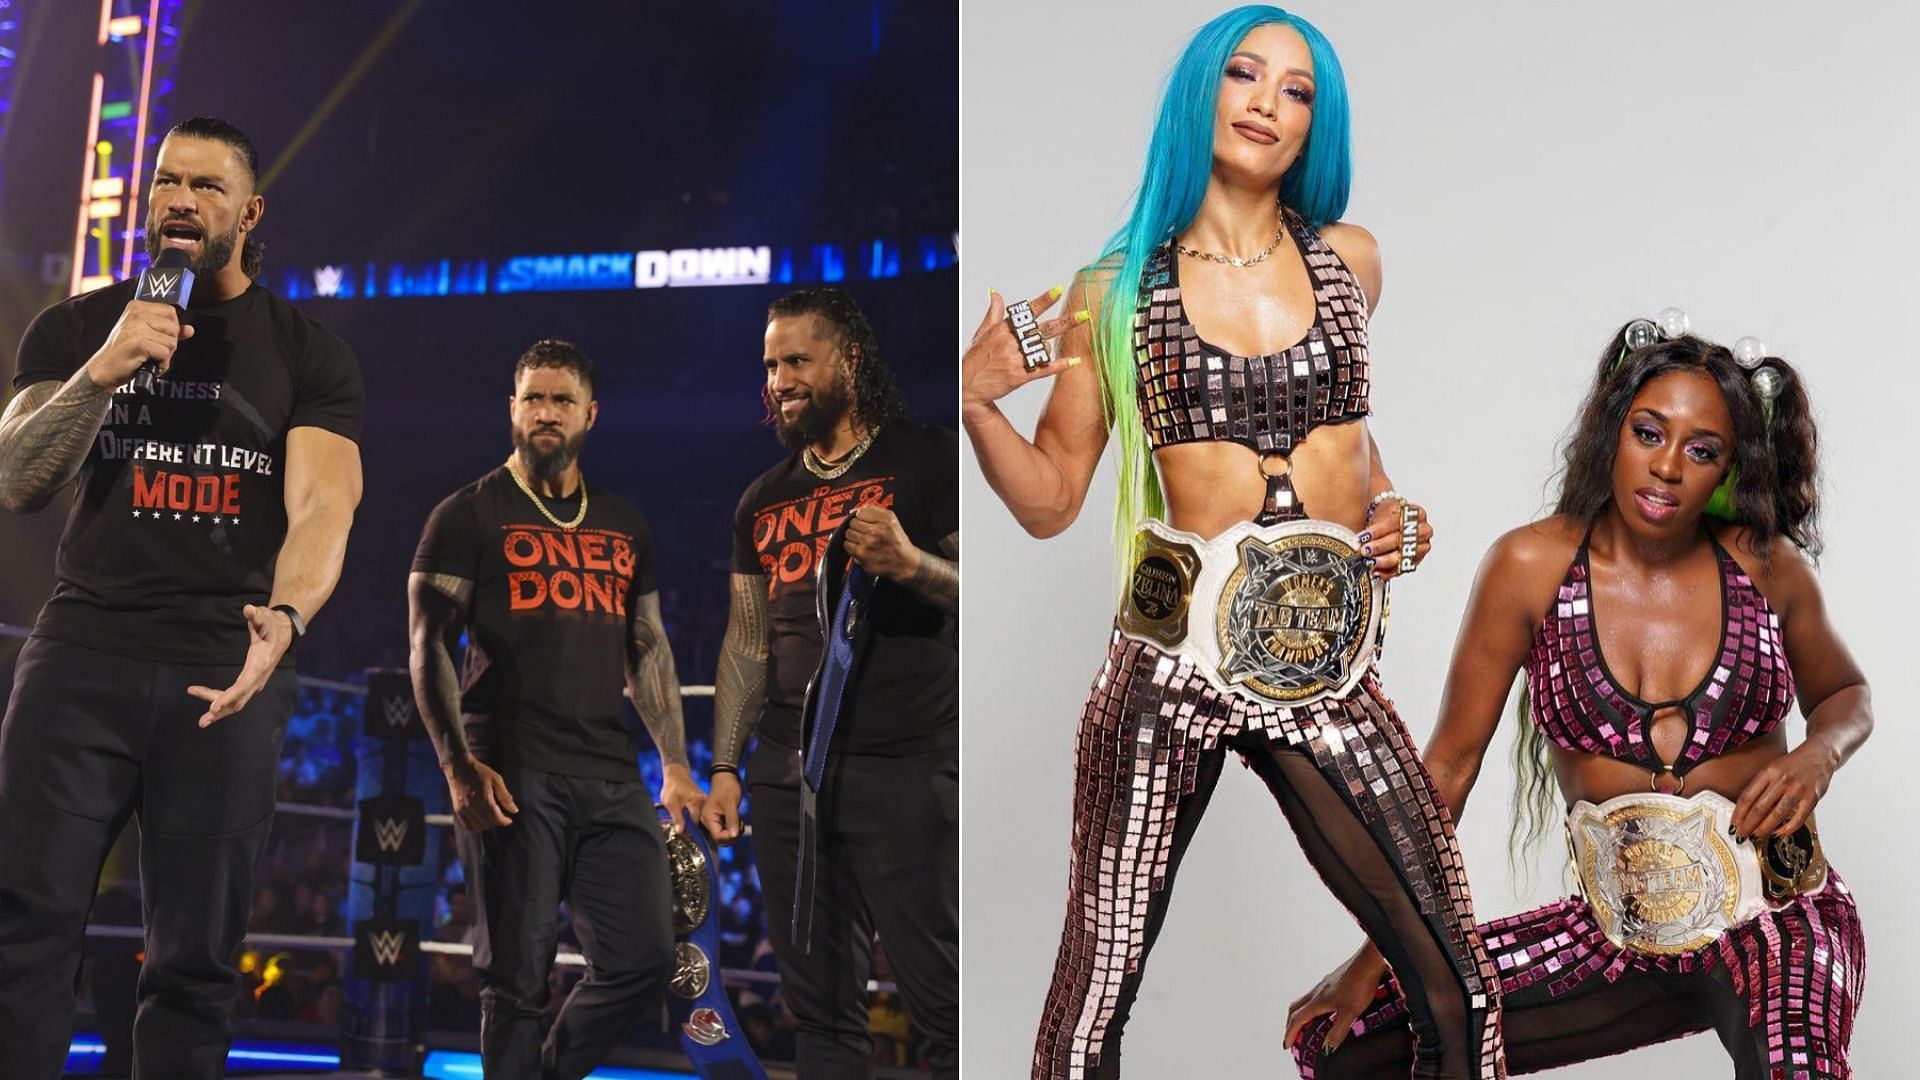 Could this controversy be a way for Naomi to join The Bloodline?